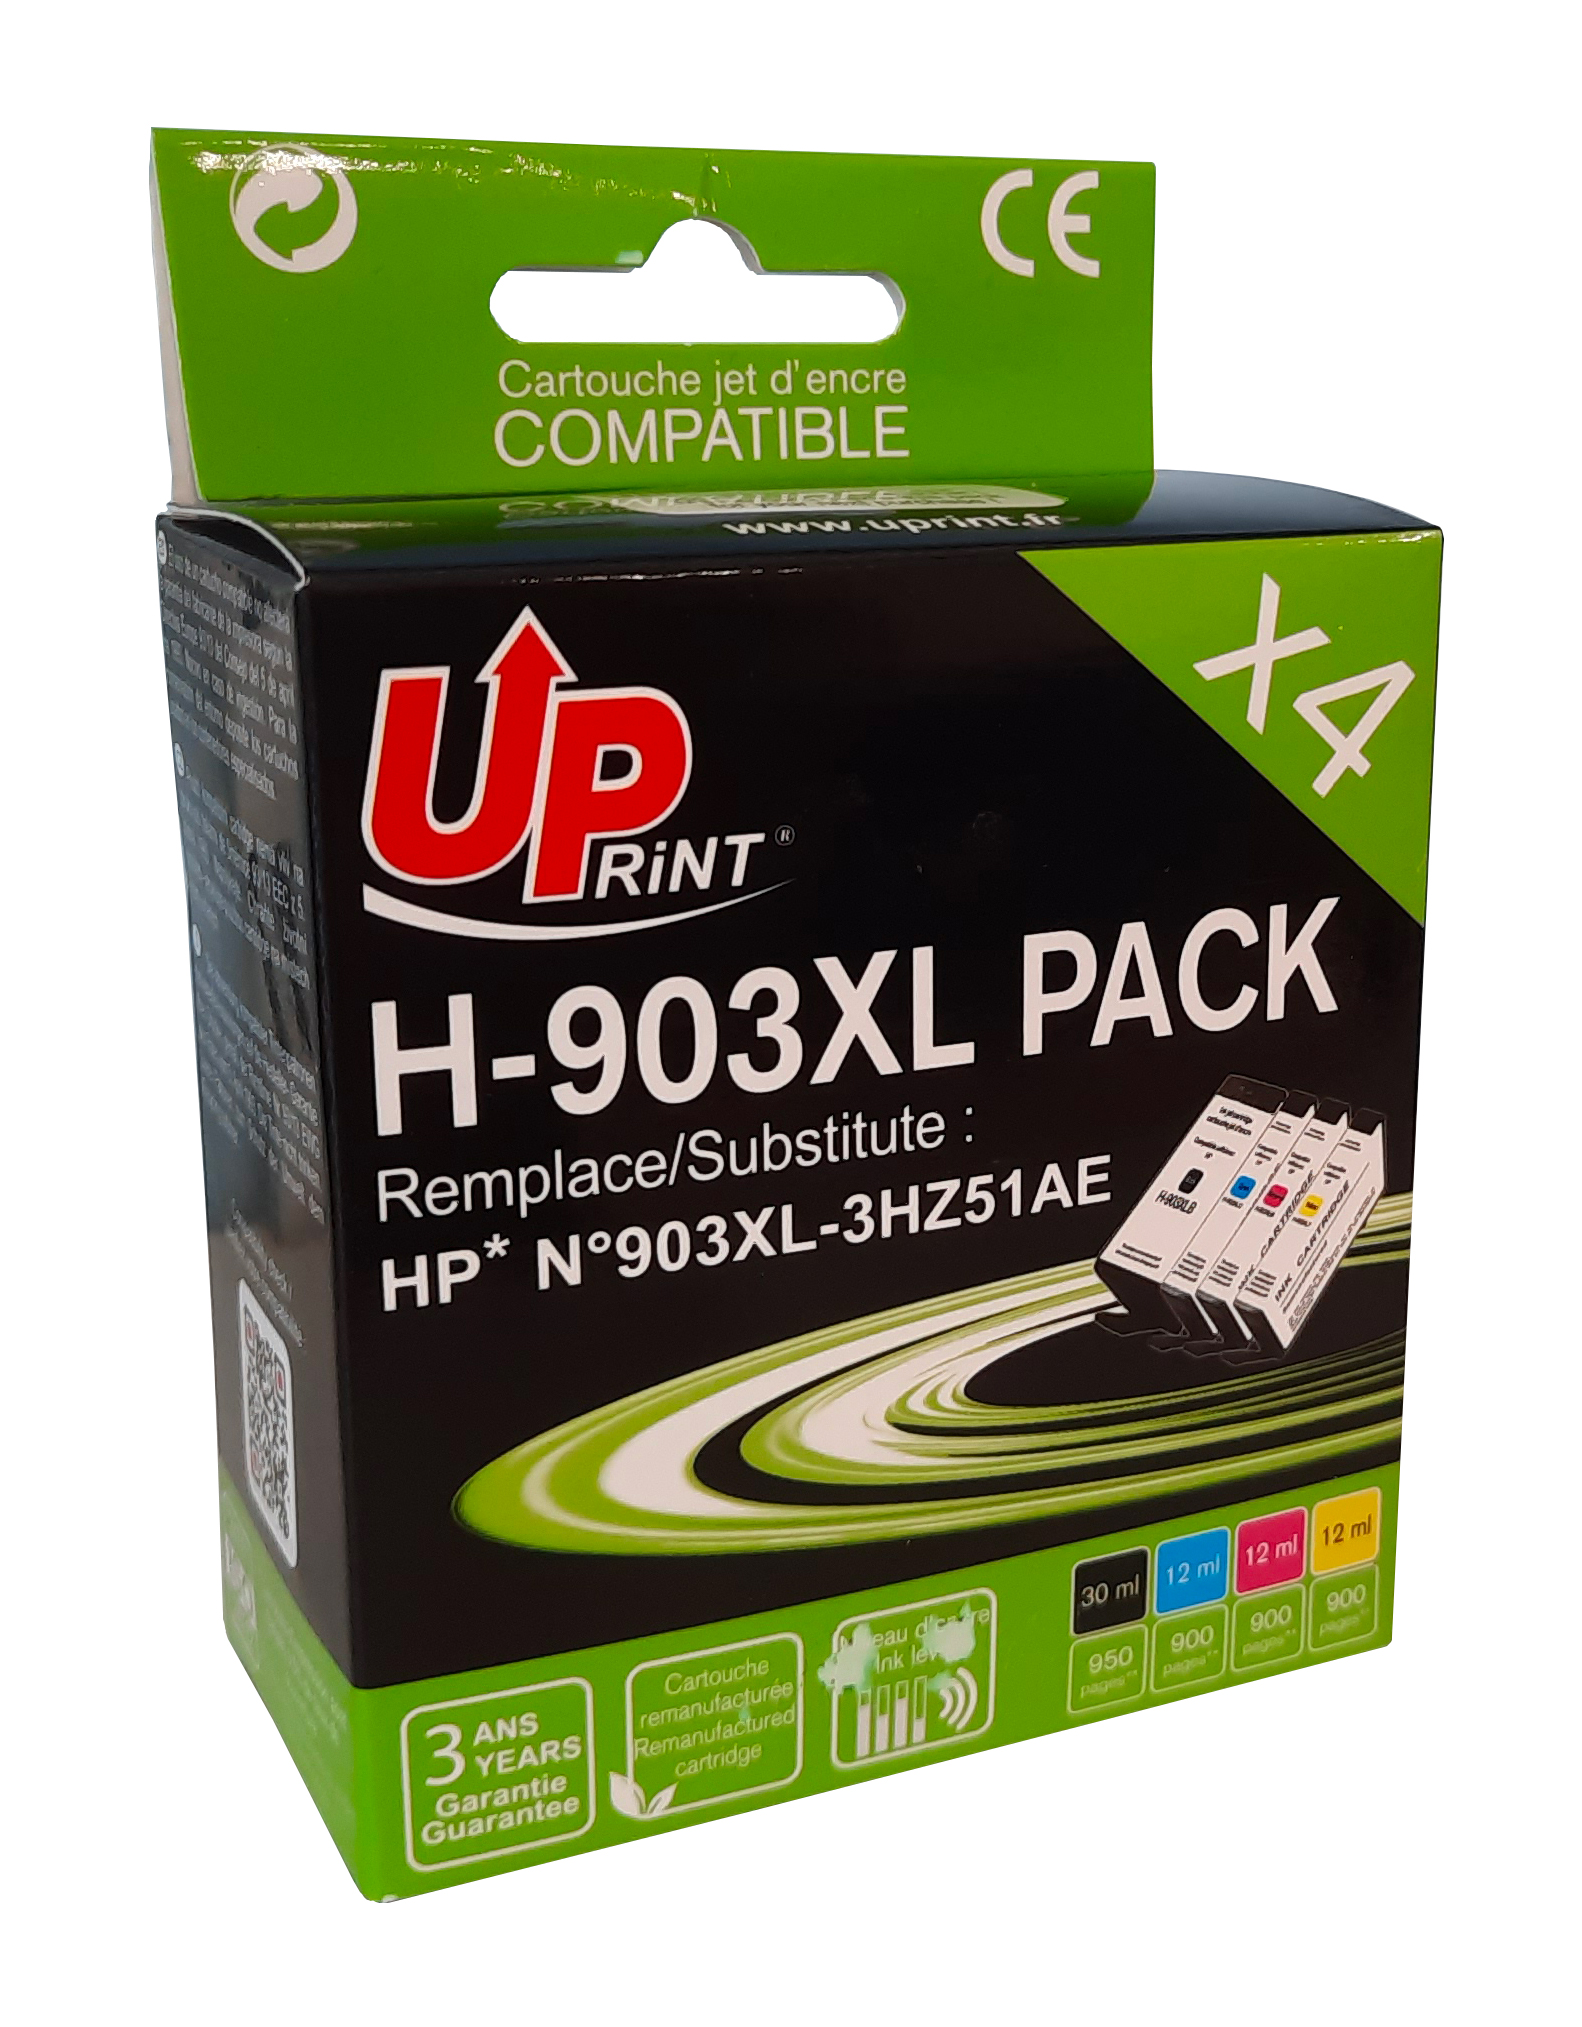 Pack UPrint compatible HP 903XL 4 cartouches